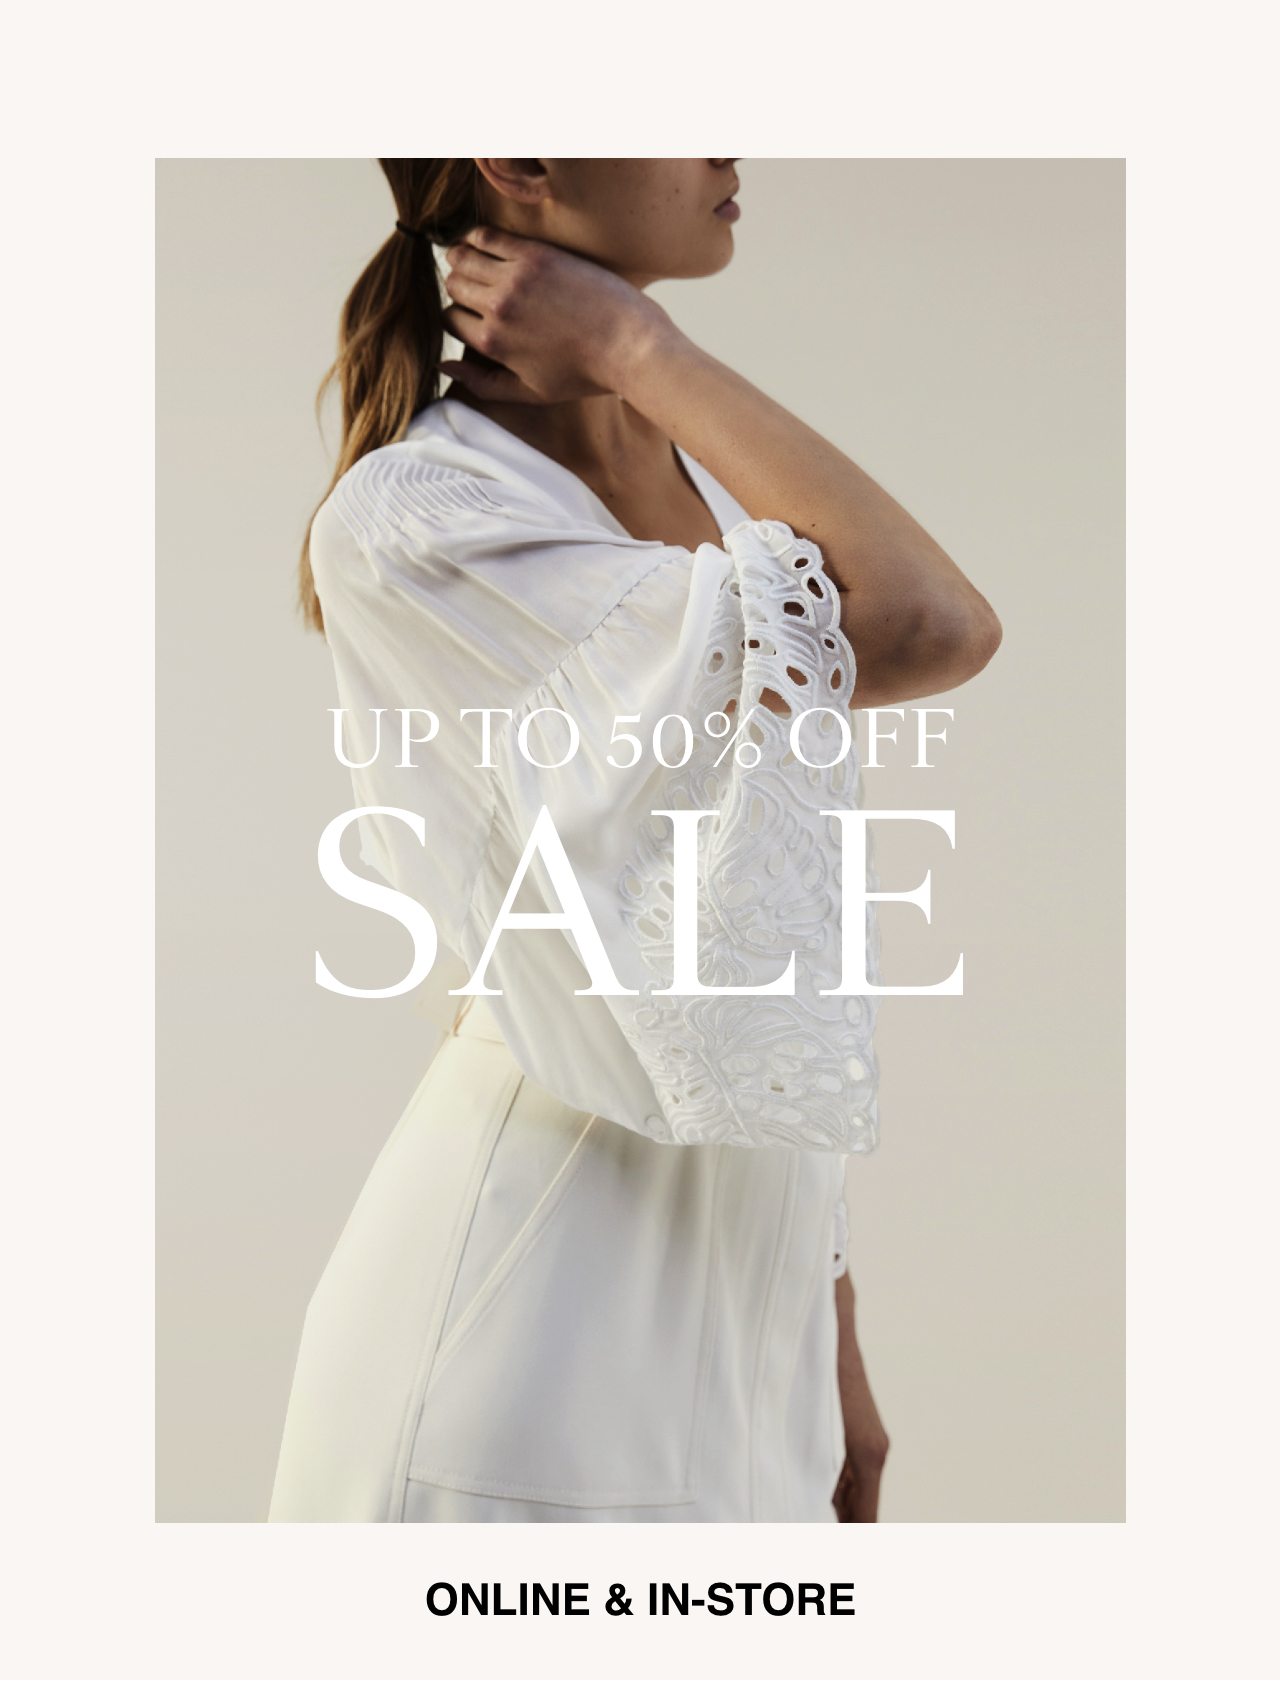 Sale Up To 50% Off